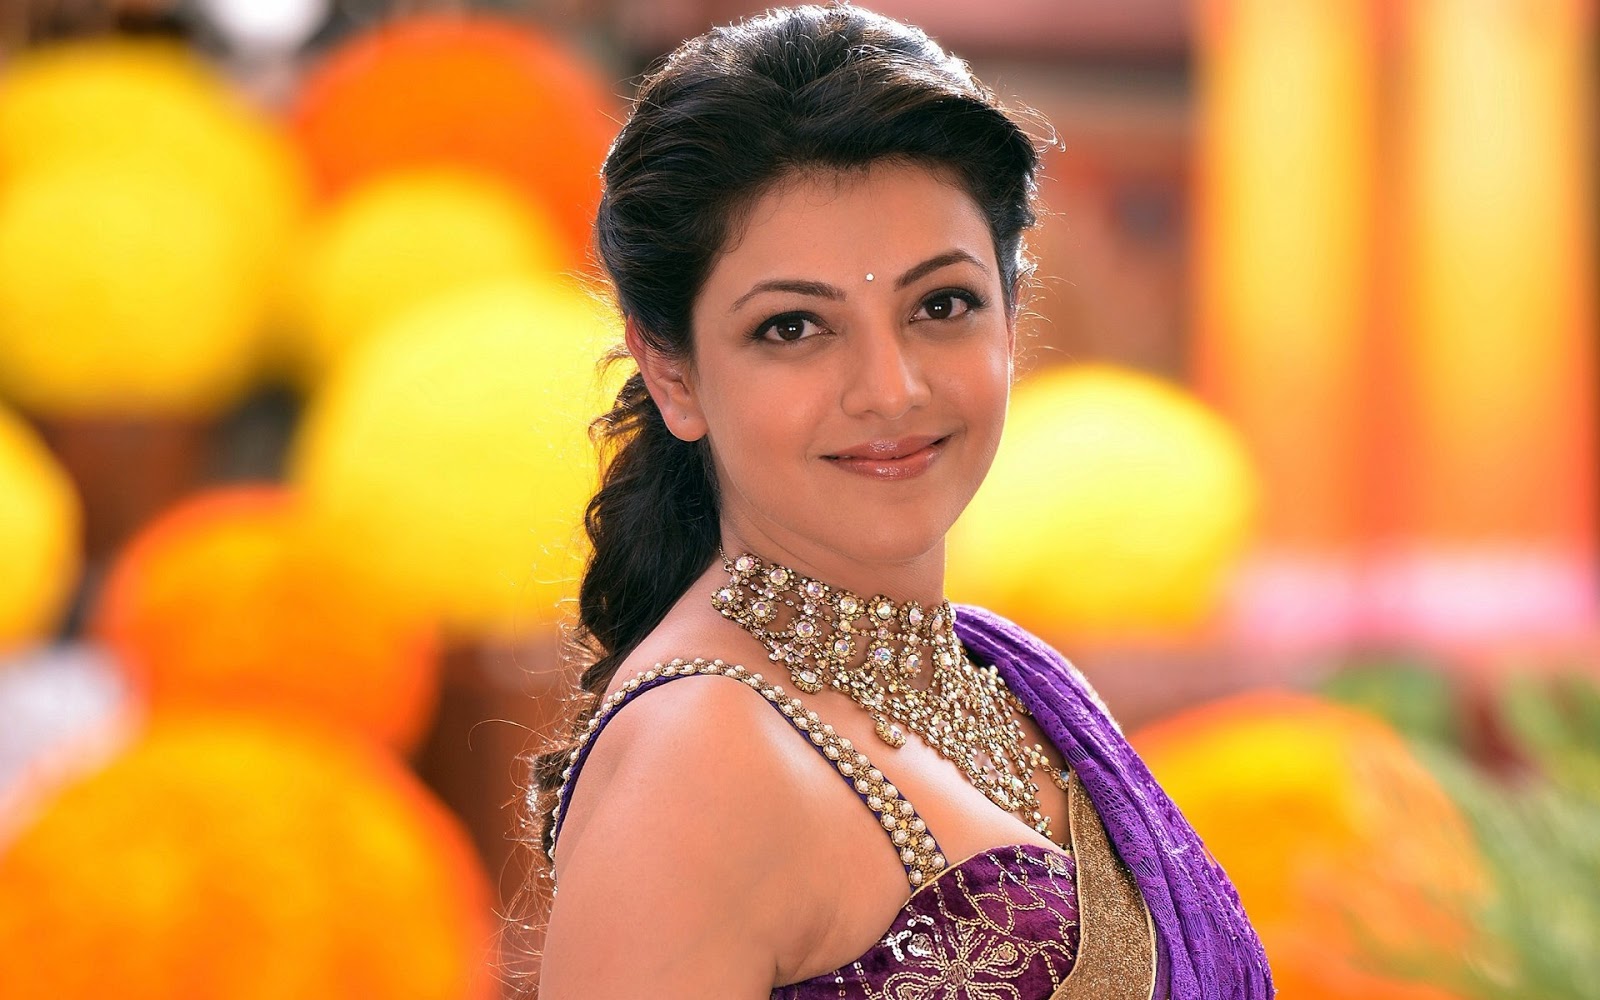 SOUTH INDIAN ACTRESS wallpapers in HD: Kajal Agarwal latest